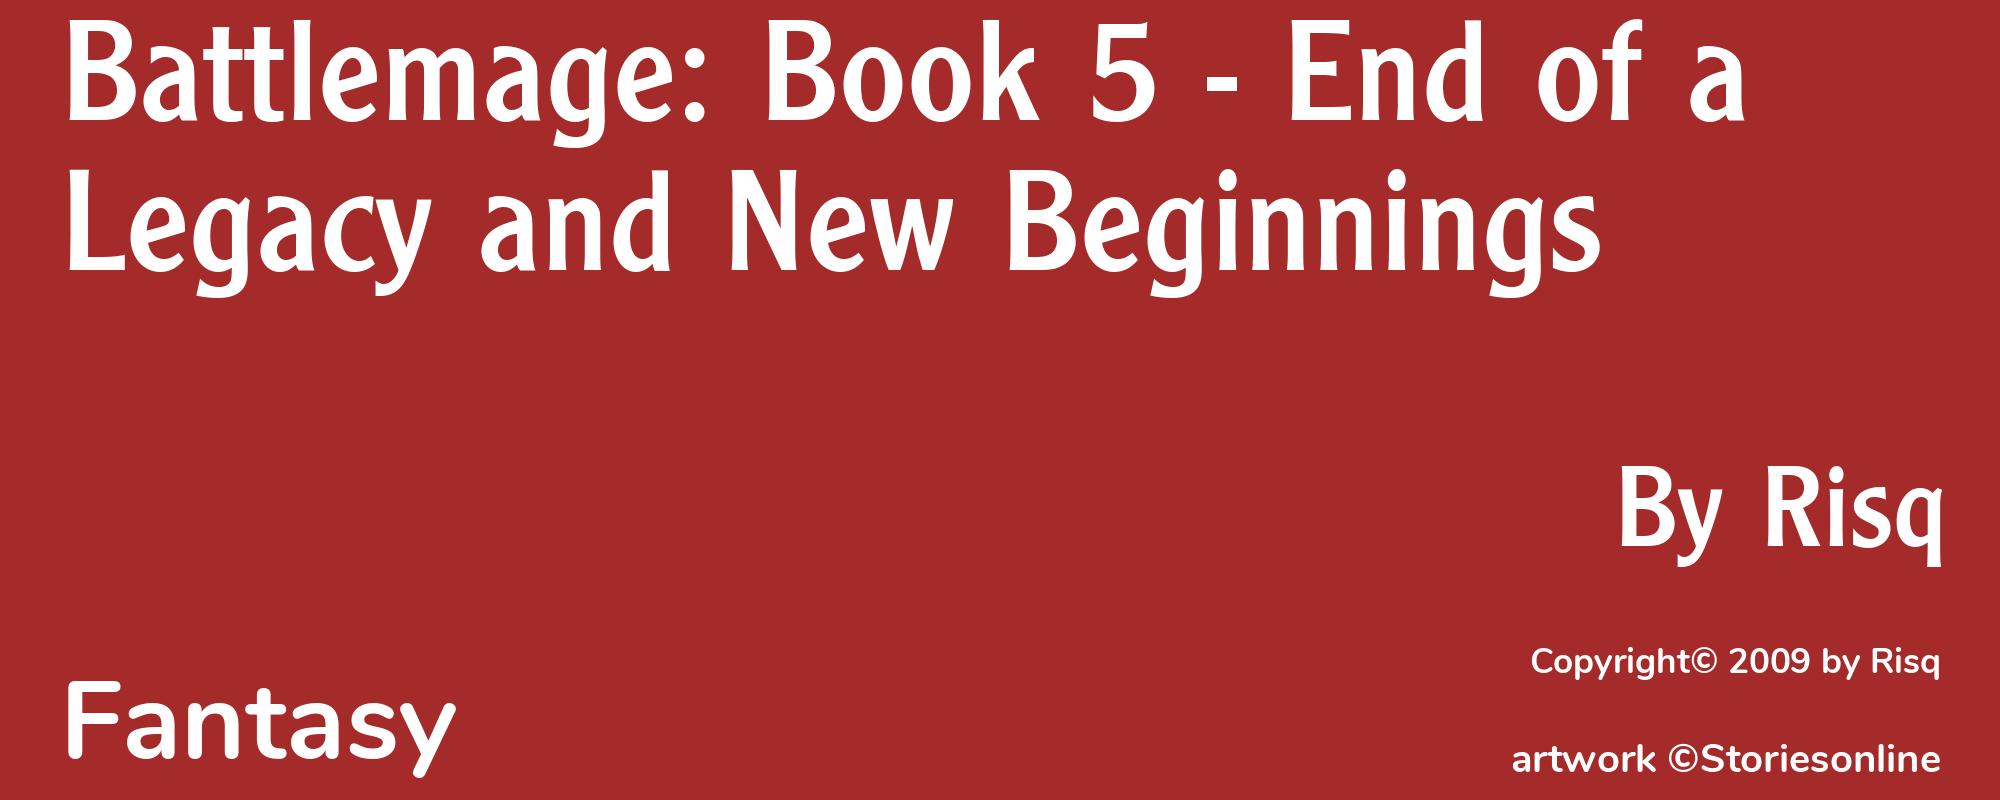 Battlemage: Book 5 - End of a Legacy and New Beginnings - Cover